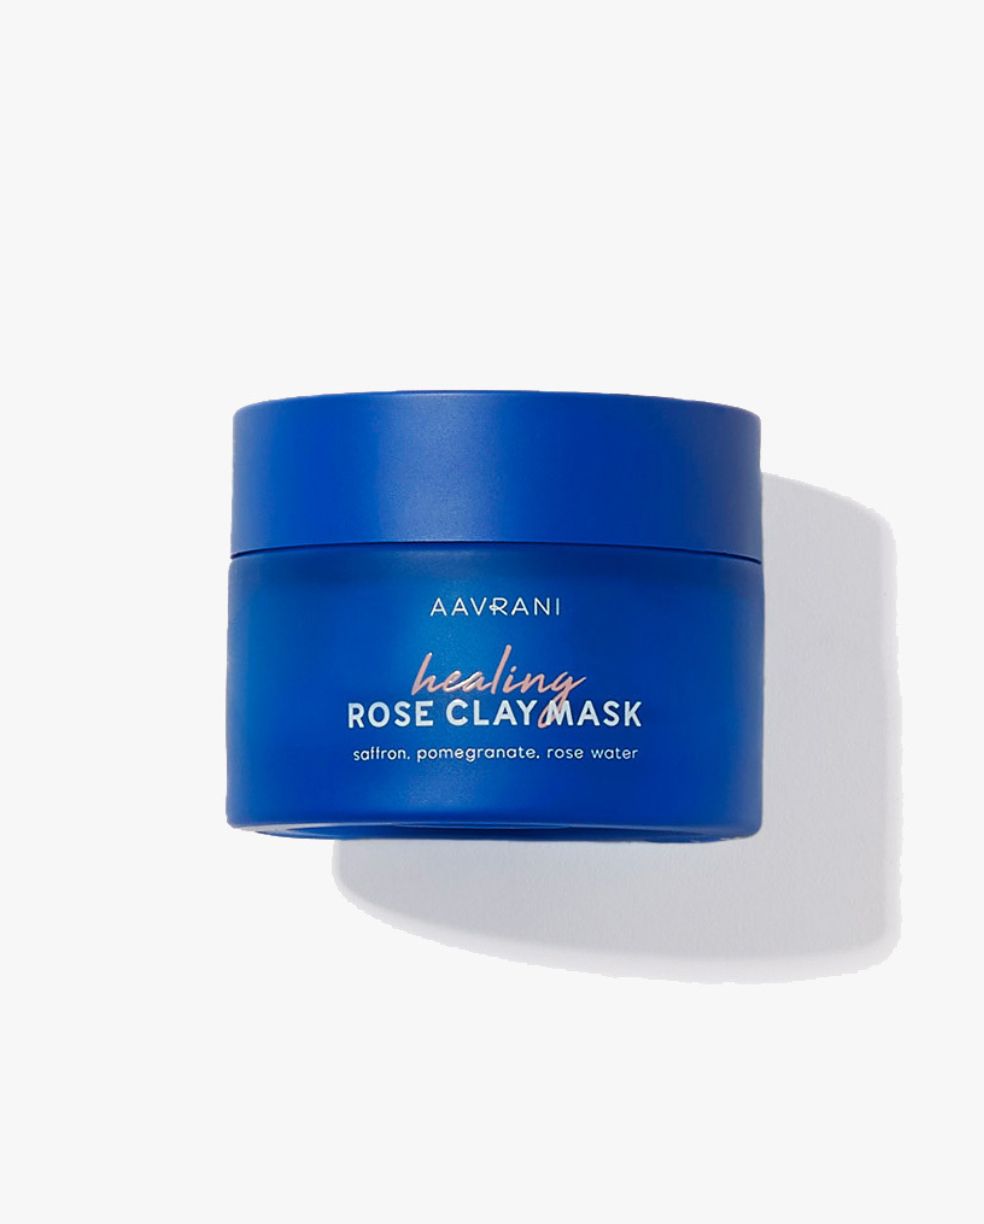 AAVRANI Healing Rose Clay Mask against grey background